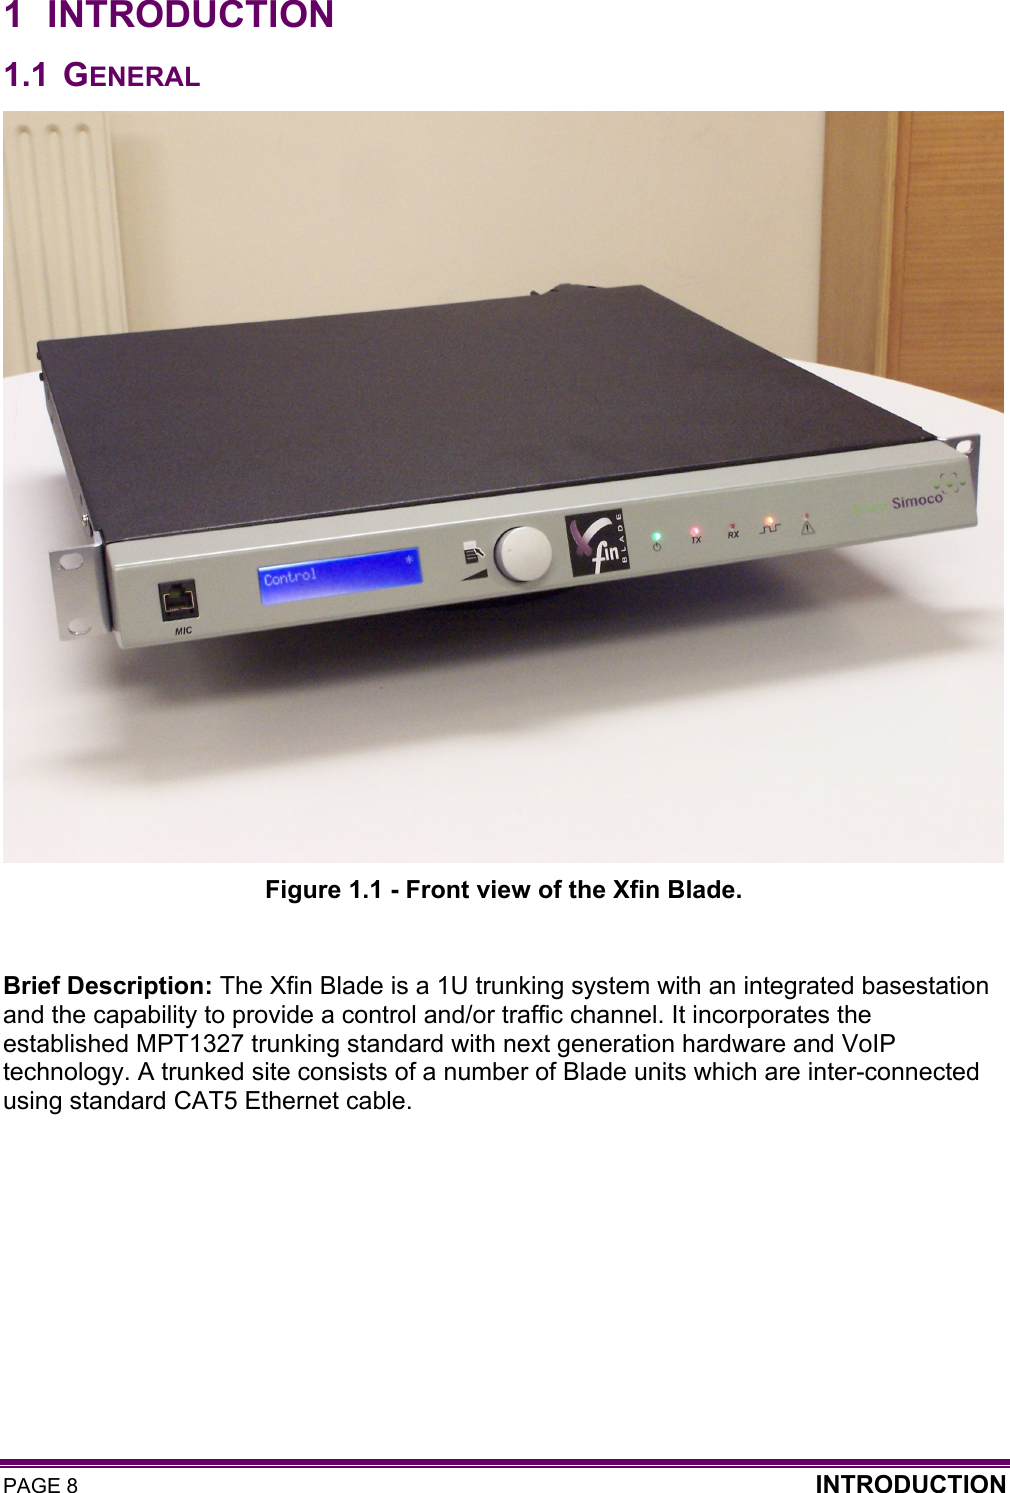 PAGE 8  INTRODUCTION  1 INTRODUCTION 1.1 GENERAL  Figure 1.1 - Front view of the Xfin Blade.  Brief Description: The Xfin Blade is a 1U trunking system with an integrated basestation and the capability to provide a control and/or traffic channel. It incorporates the established MPT1327 trunking standard with next generation hardware and VoIP technology. A trunked site consists of a number of Blade units which are inter-connected using standard CAT5 Ethernet cable.     